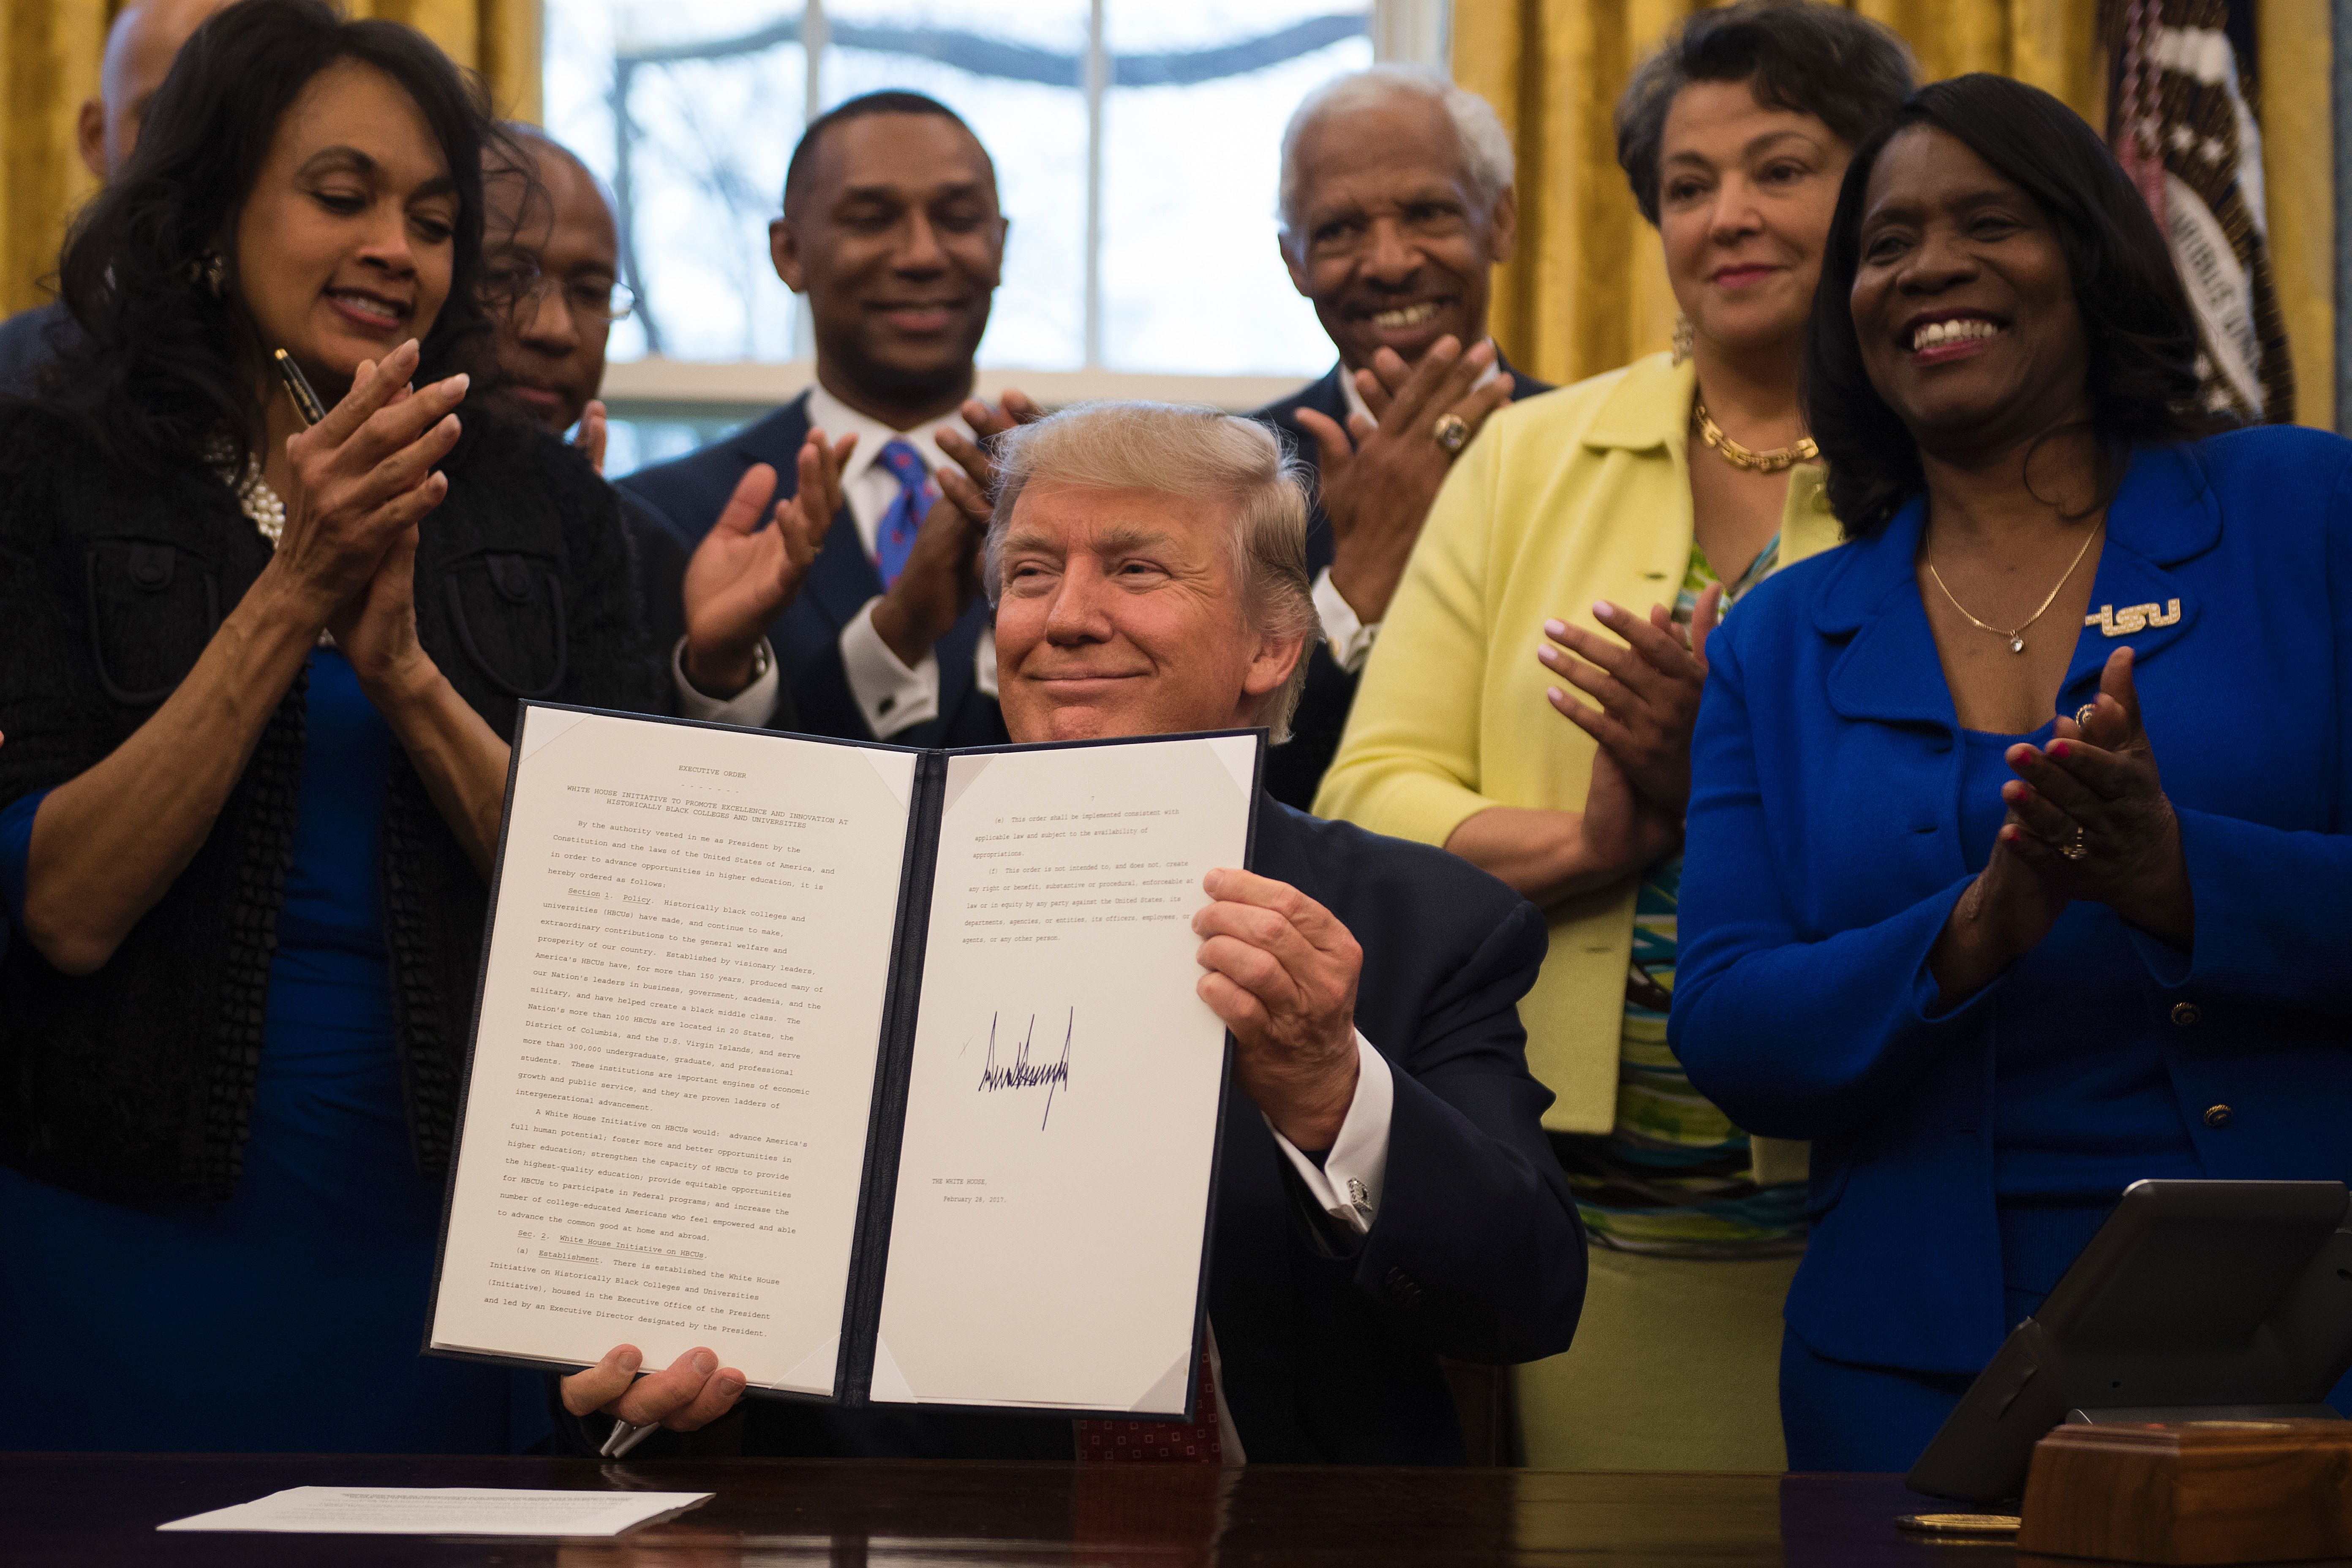 US President Donald Trump (C) holds up an executive order to bolster historically black colleges and universities (HBCUs) after signing it in the Oval Office of the White House in Washington, DC, February 28, 2017. / AFP / JIM WATSON (Photo credit should read JIM WATSON/AFP via Getty Images)